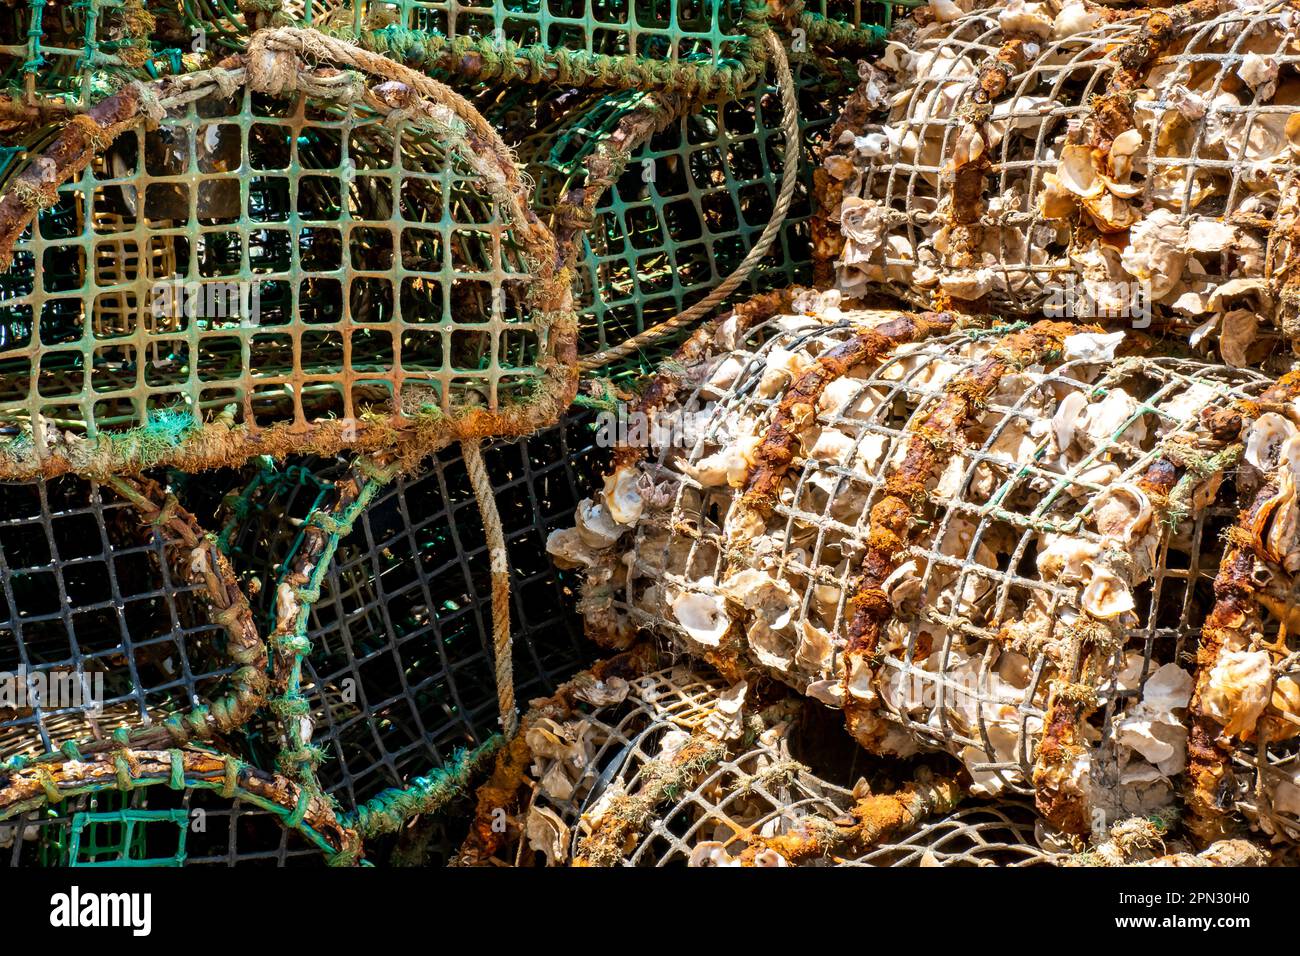 Stack of lobster traps create a contrast between the dirty used traps and their clean washed counterparts, showcasing the varying stages. Stock Photo